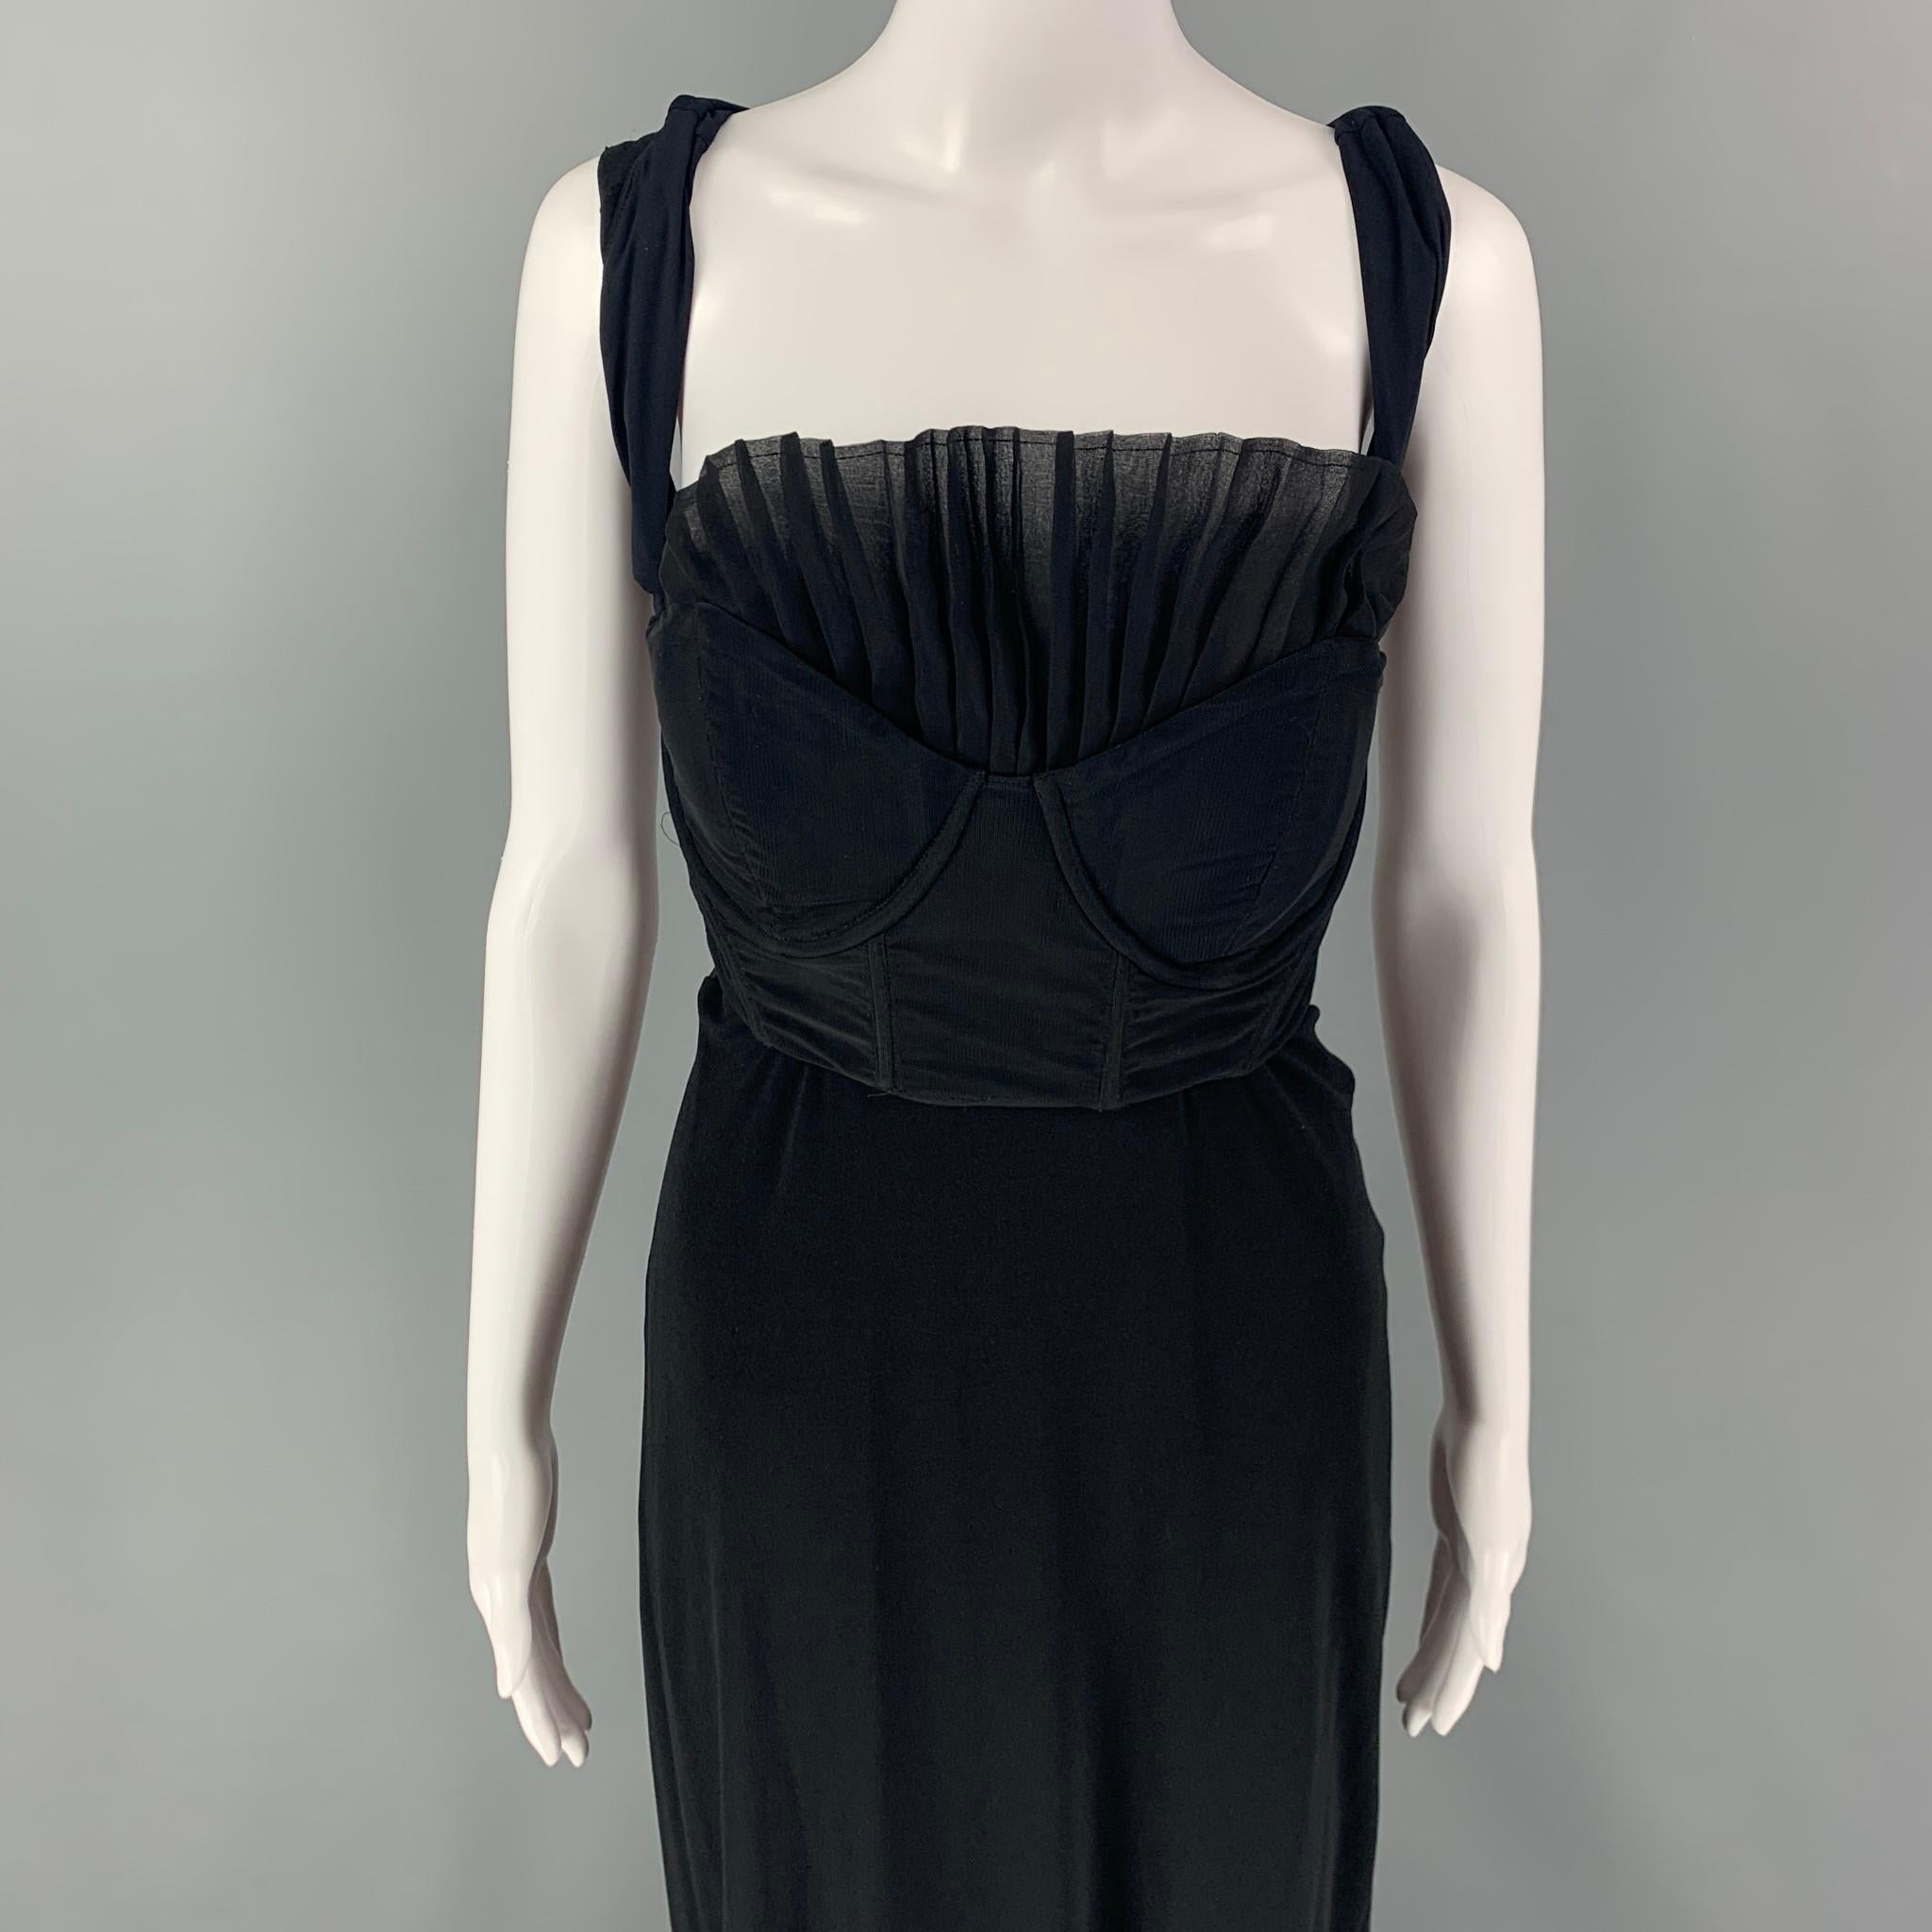 GIAMBATTISTA VALLI dress comes in a black silk featuring a sleeveless style, pleated panel, bustier detail, and a back zip up closure. Made in Italy. 

Very Good Pre-Owned Condition.
Marked: 46/L

Measurements:

Bust: 24 in.
Waist: 24 in.
Hip: 32